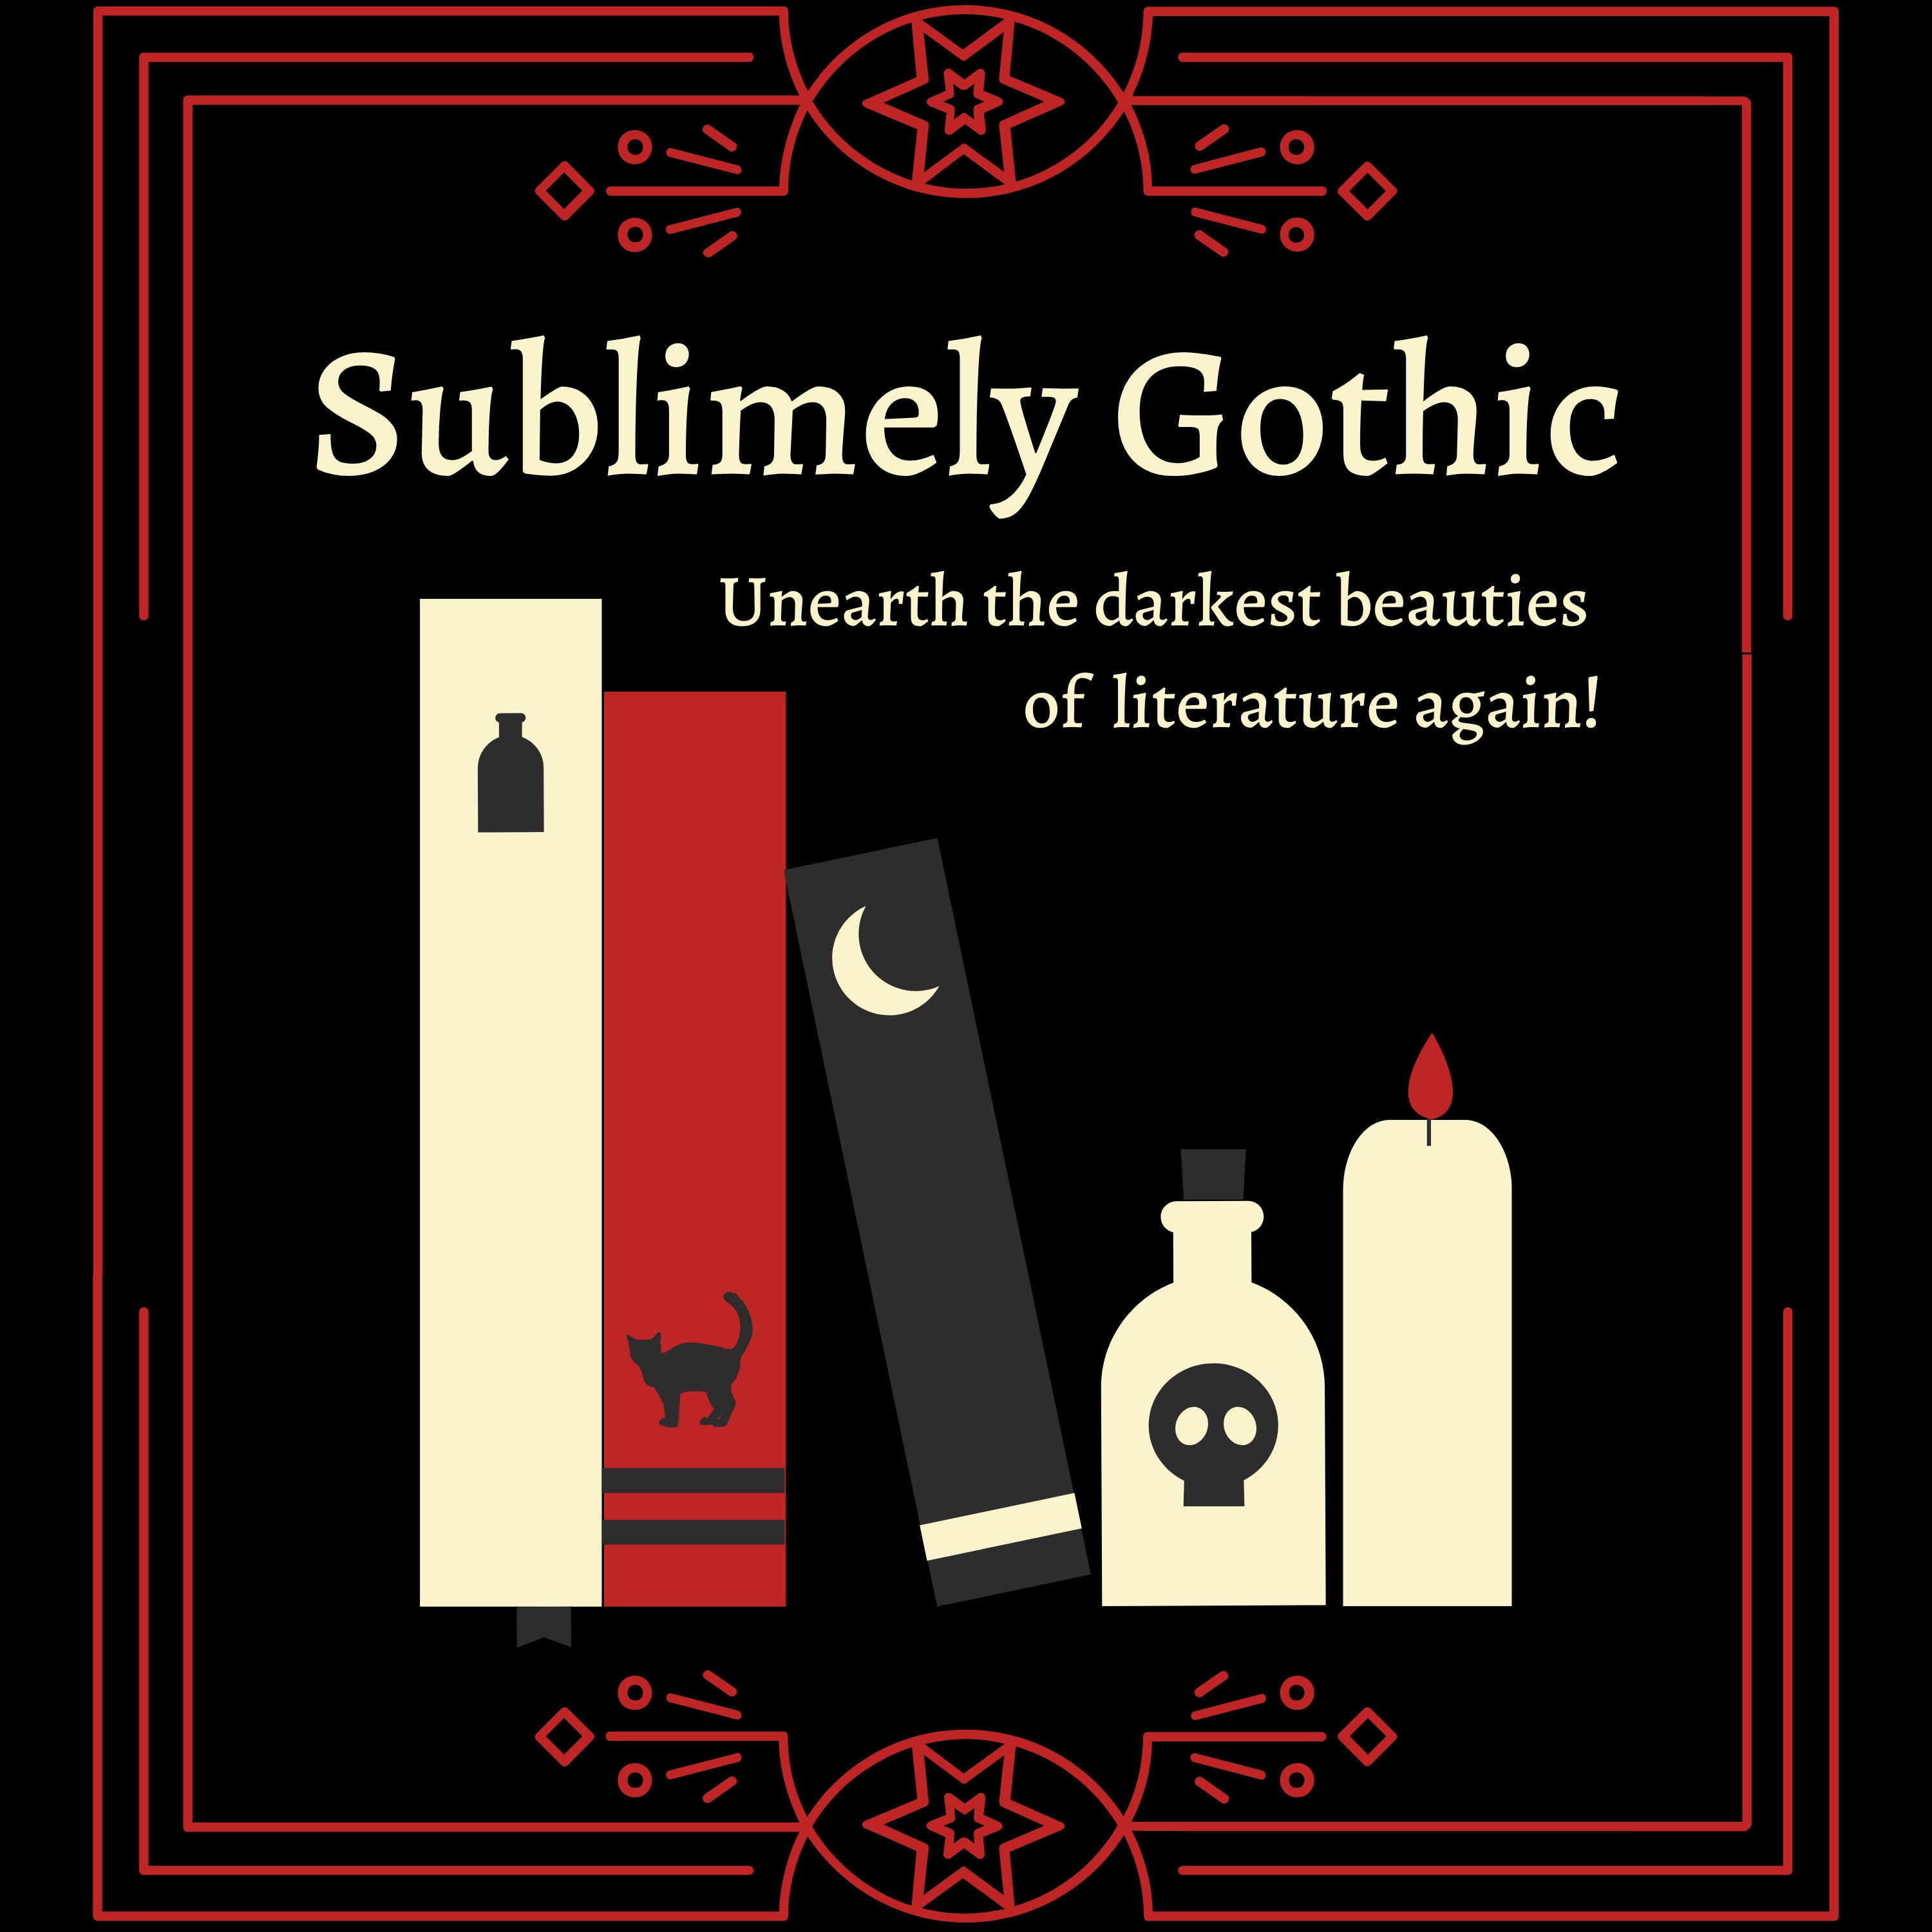 Sublimely Gothic